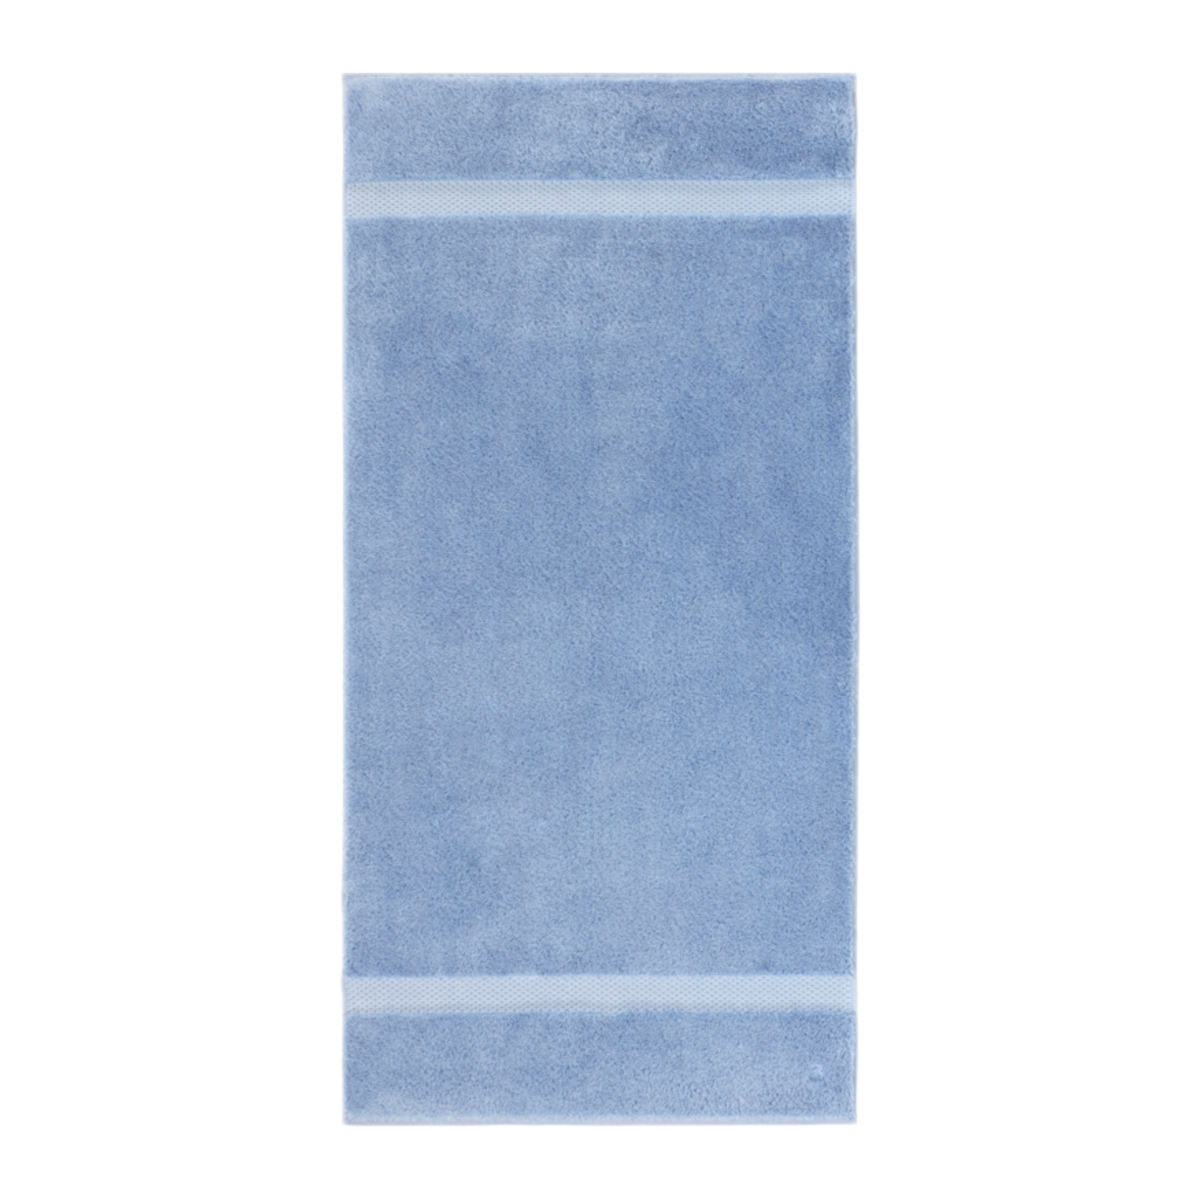 Guest Towel of Yves Delorme Etoile Bath Towels in Azure Color